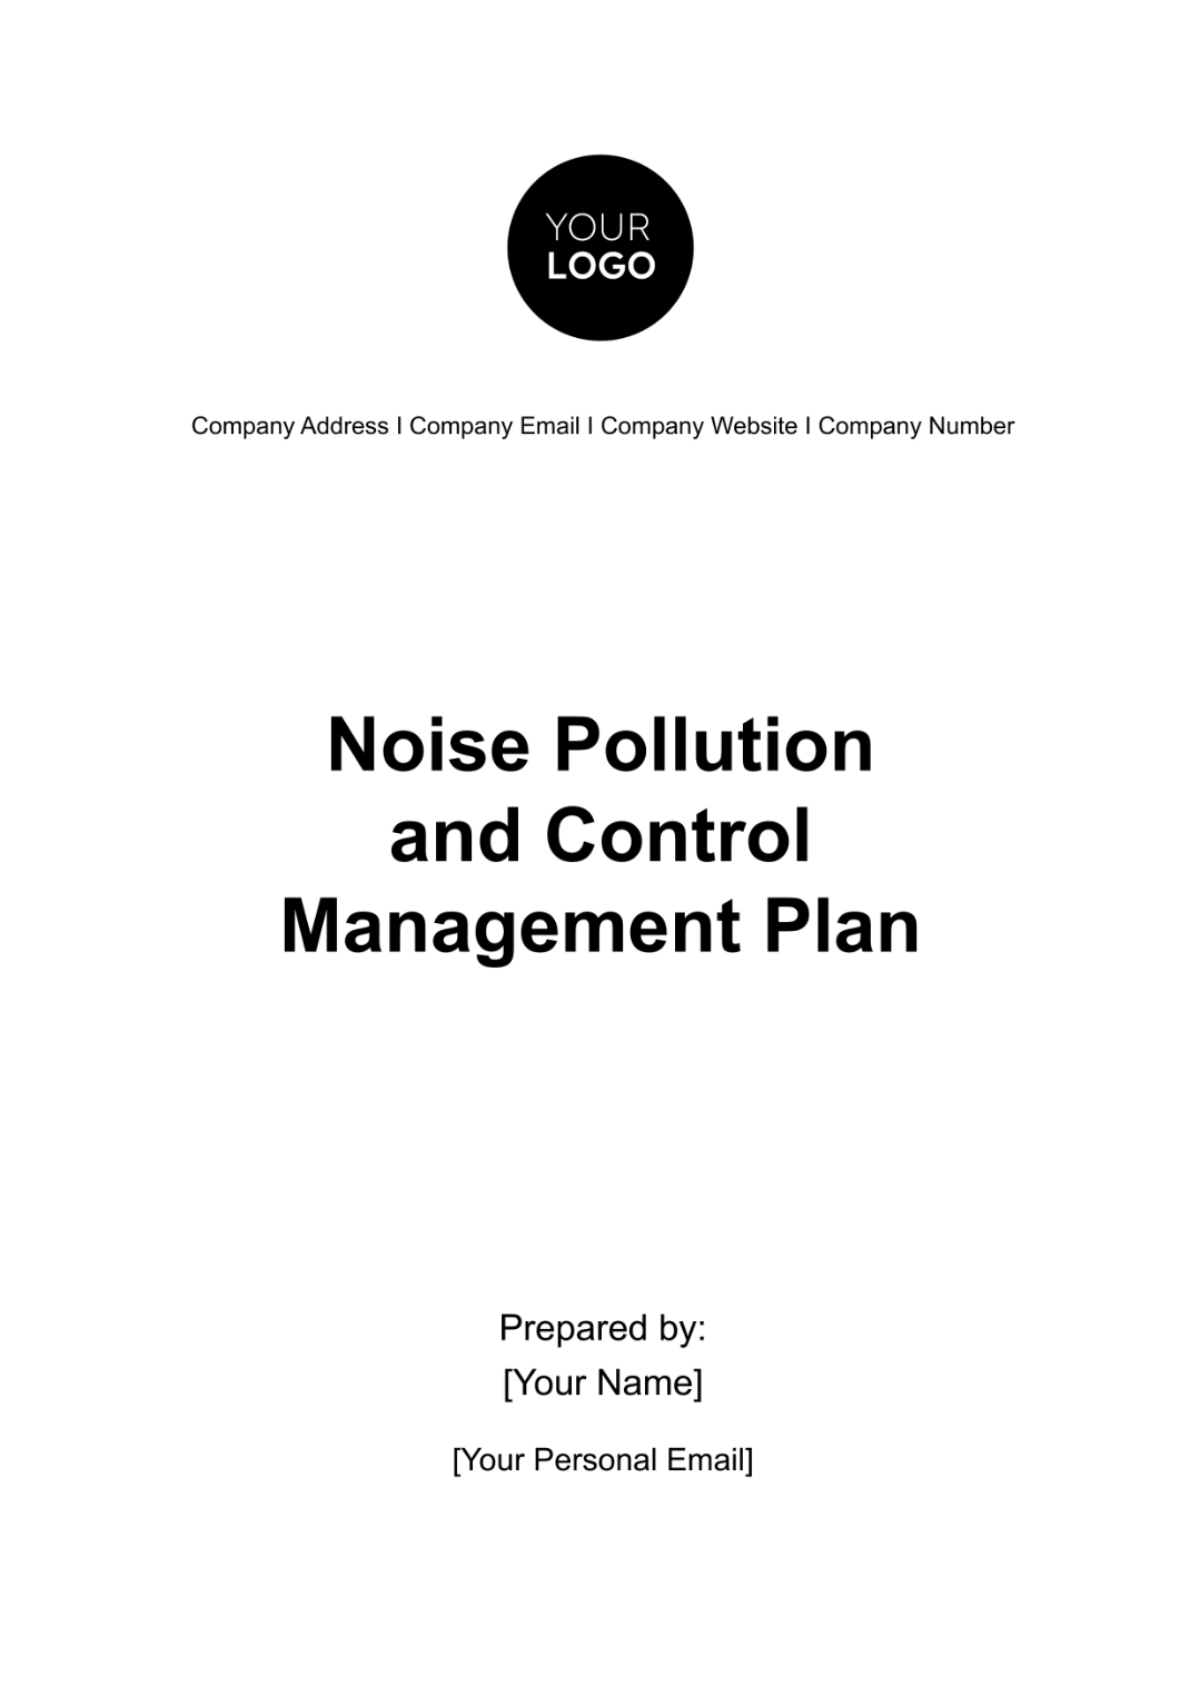 Noise Pollution and Control Management Plan HR Template